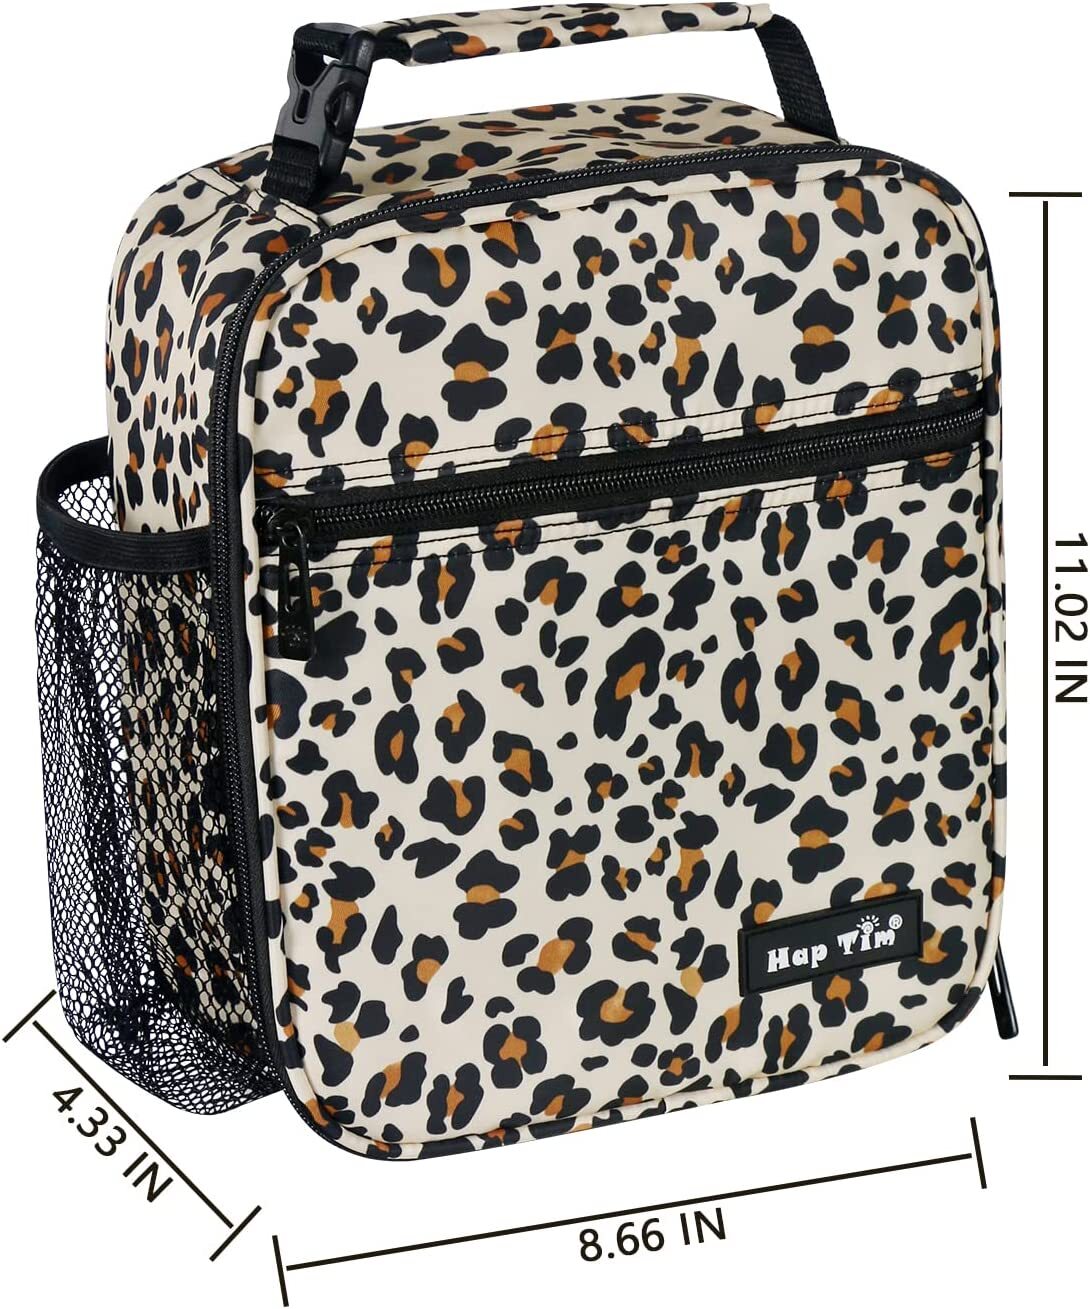 Best Hap Tim Insulated Lunch Bag Women, Reusable Lunch Box for Women,  Adluts Lunchbox for Office Work School, Portable Lunchbag for Kids Girls  Toddler, Leopard Print（18654-LP） at shop diaper backpack, lunch box